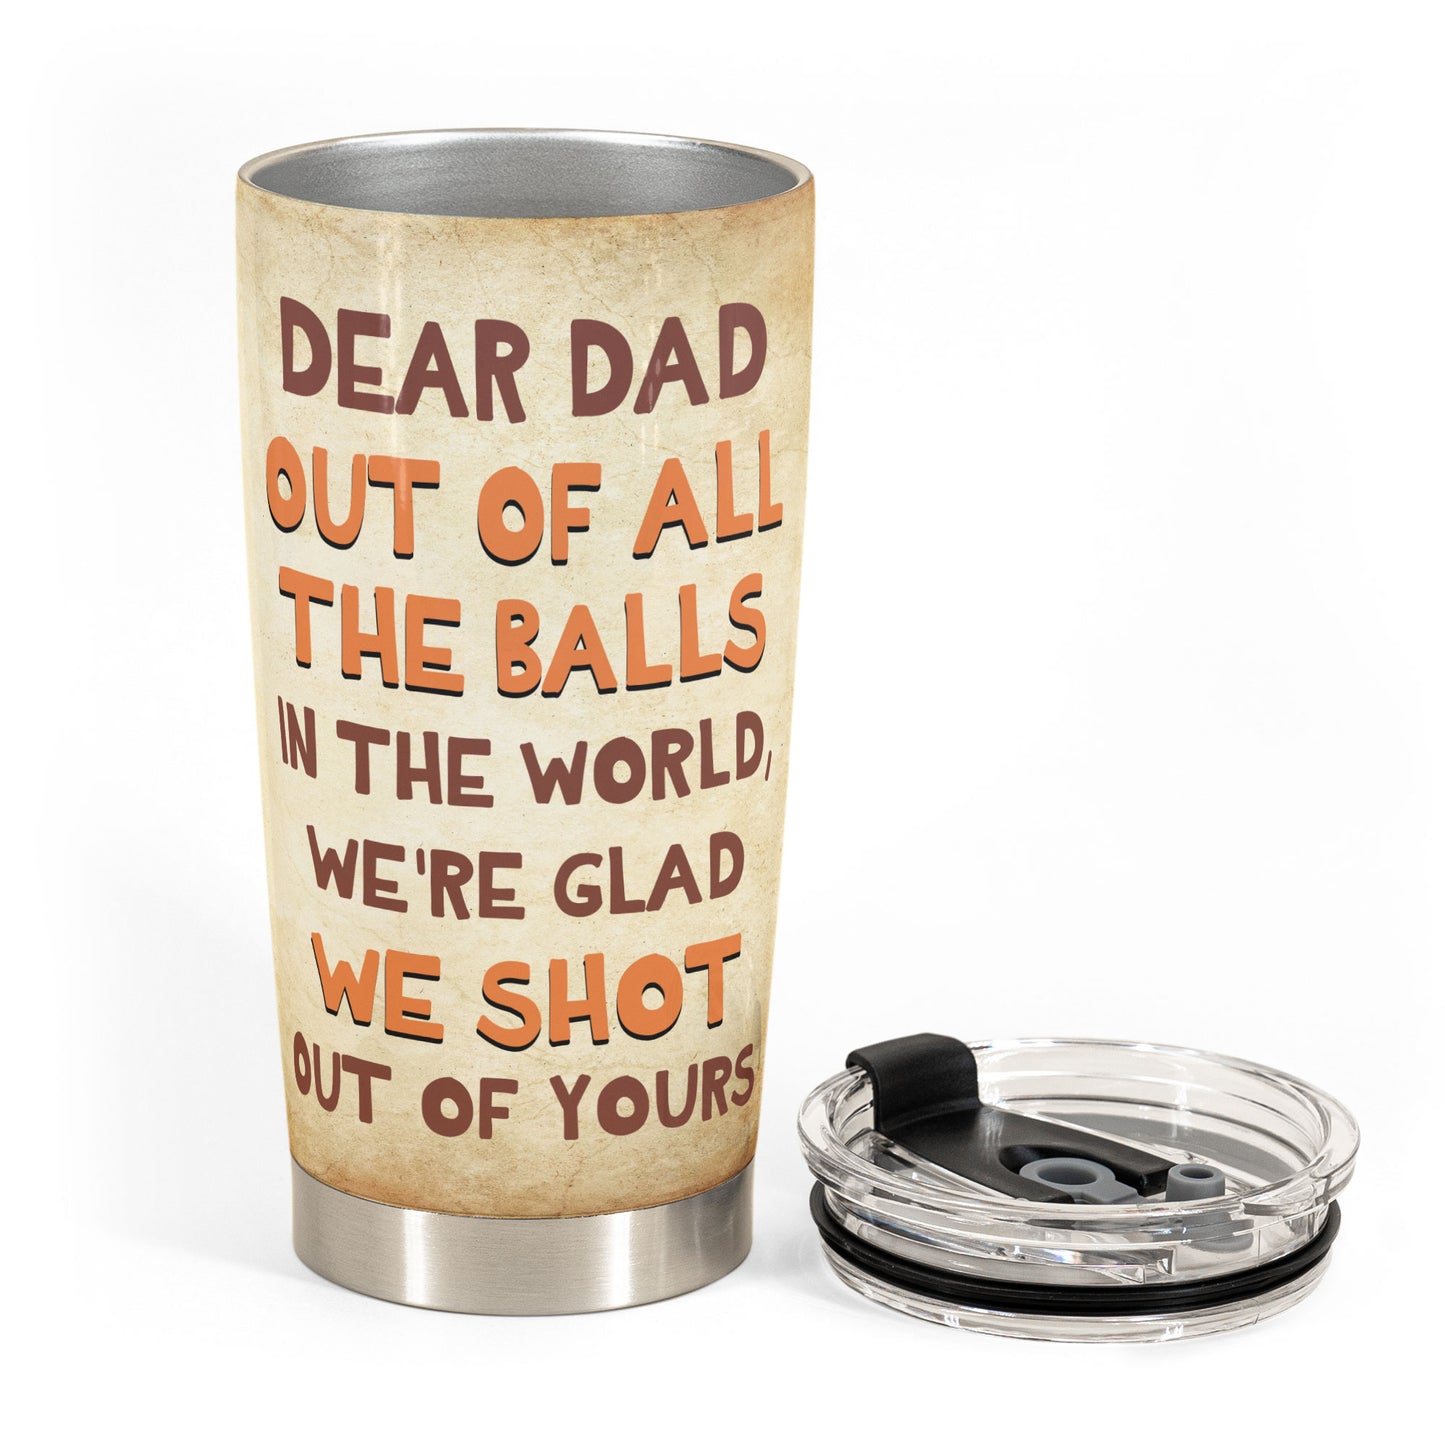 We'Re Glad We Shot Out Of Yours - Personalized Tumbler Cup - Father's Day, Birthday, Funny Gift For Dad, Father